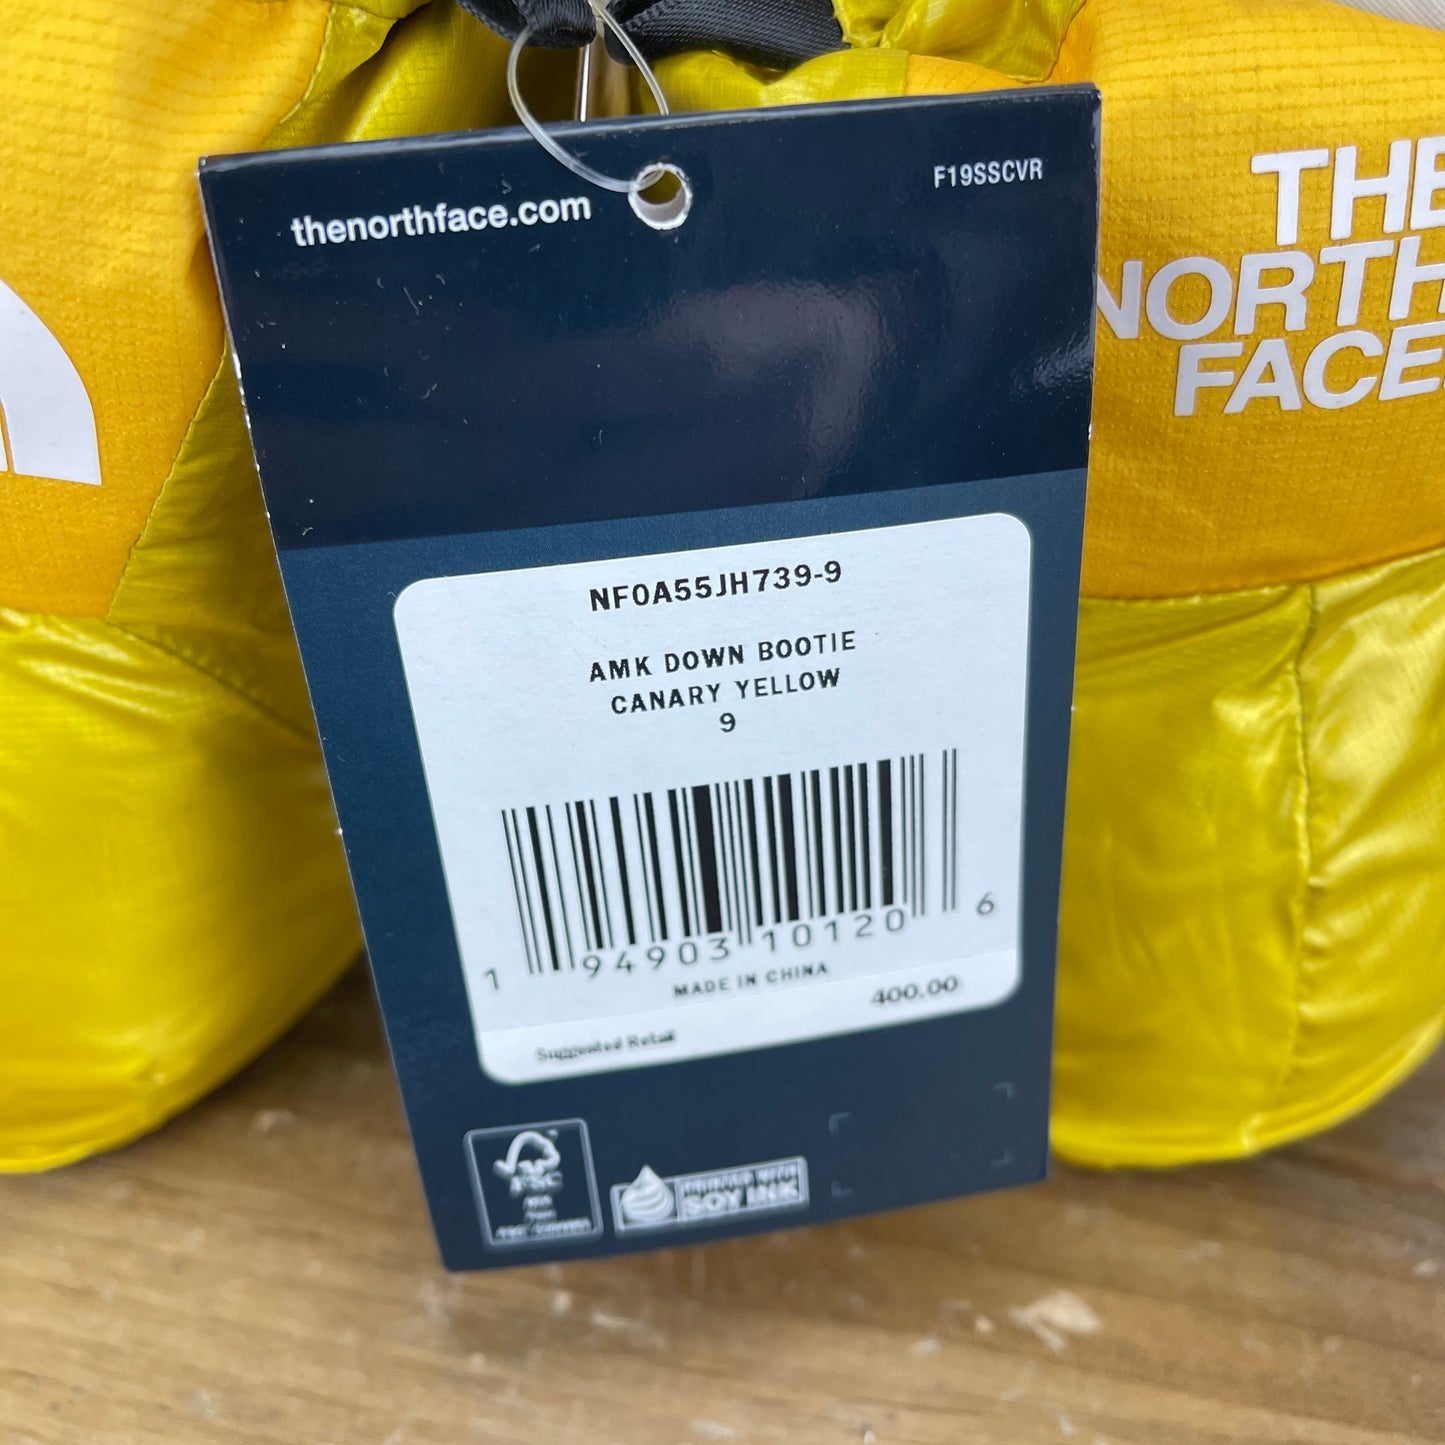 New! The North Face AMK-1000 Fill Down Booty Canary Yellow Socks Summit Series